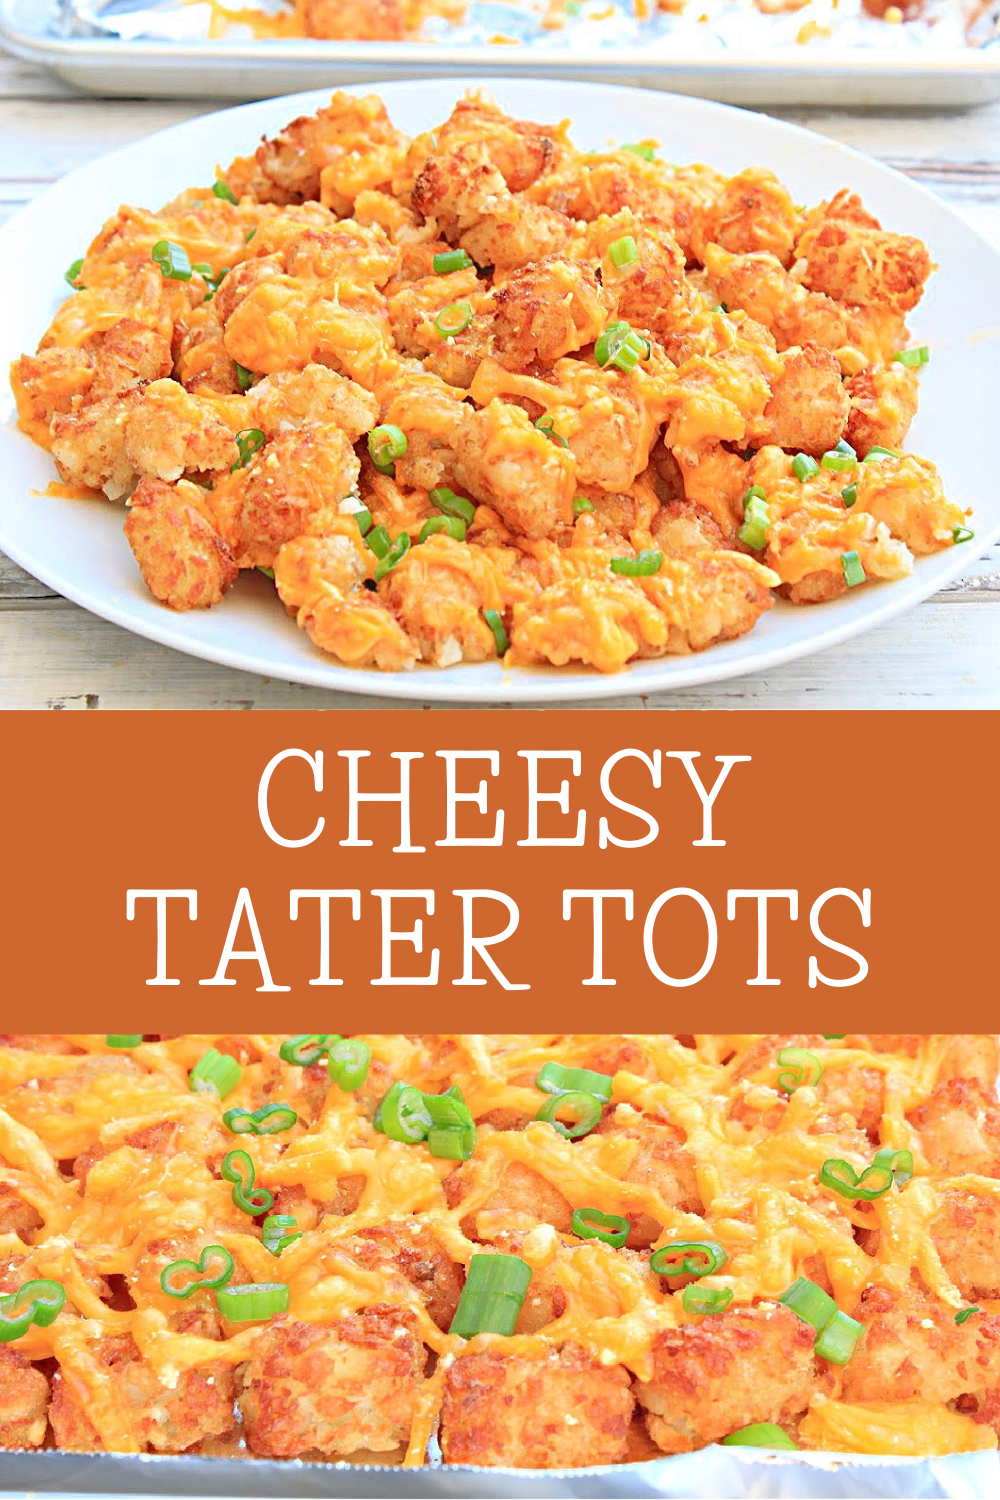 Cheesy Tater Tots ~ Crispy tater tots smothered in shredded cheddar cheese and topped with scallions. The perfect late-night snack indulgence!  via @thiswifecooks